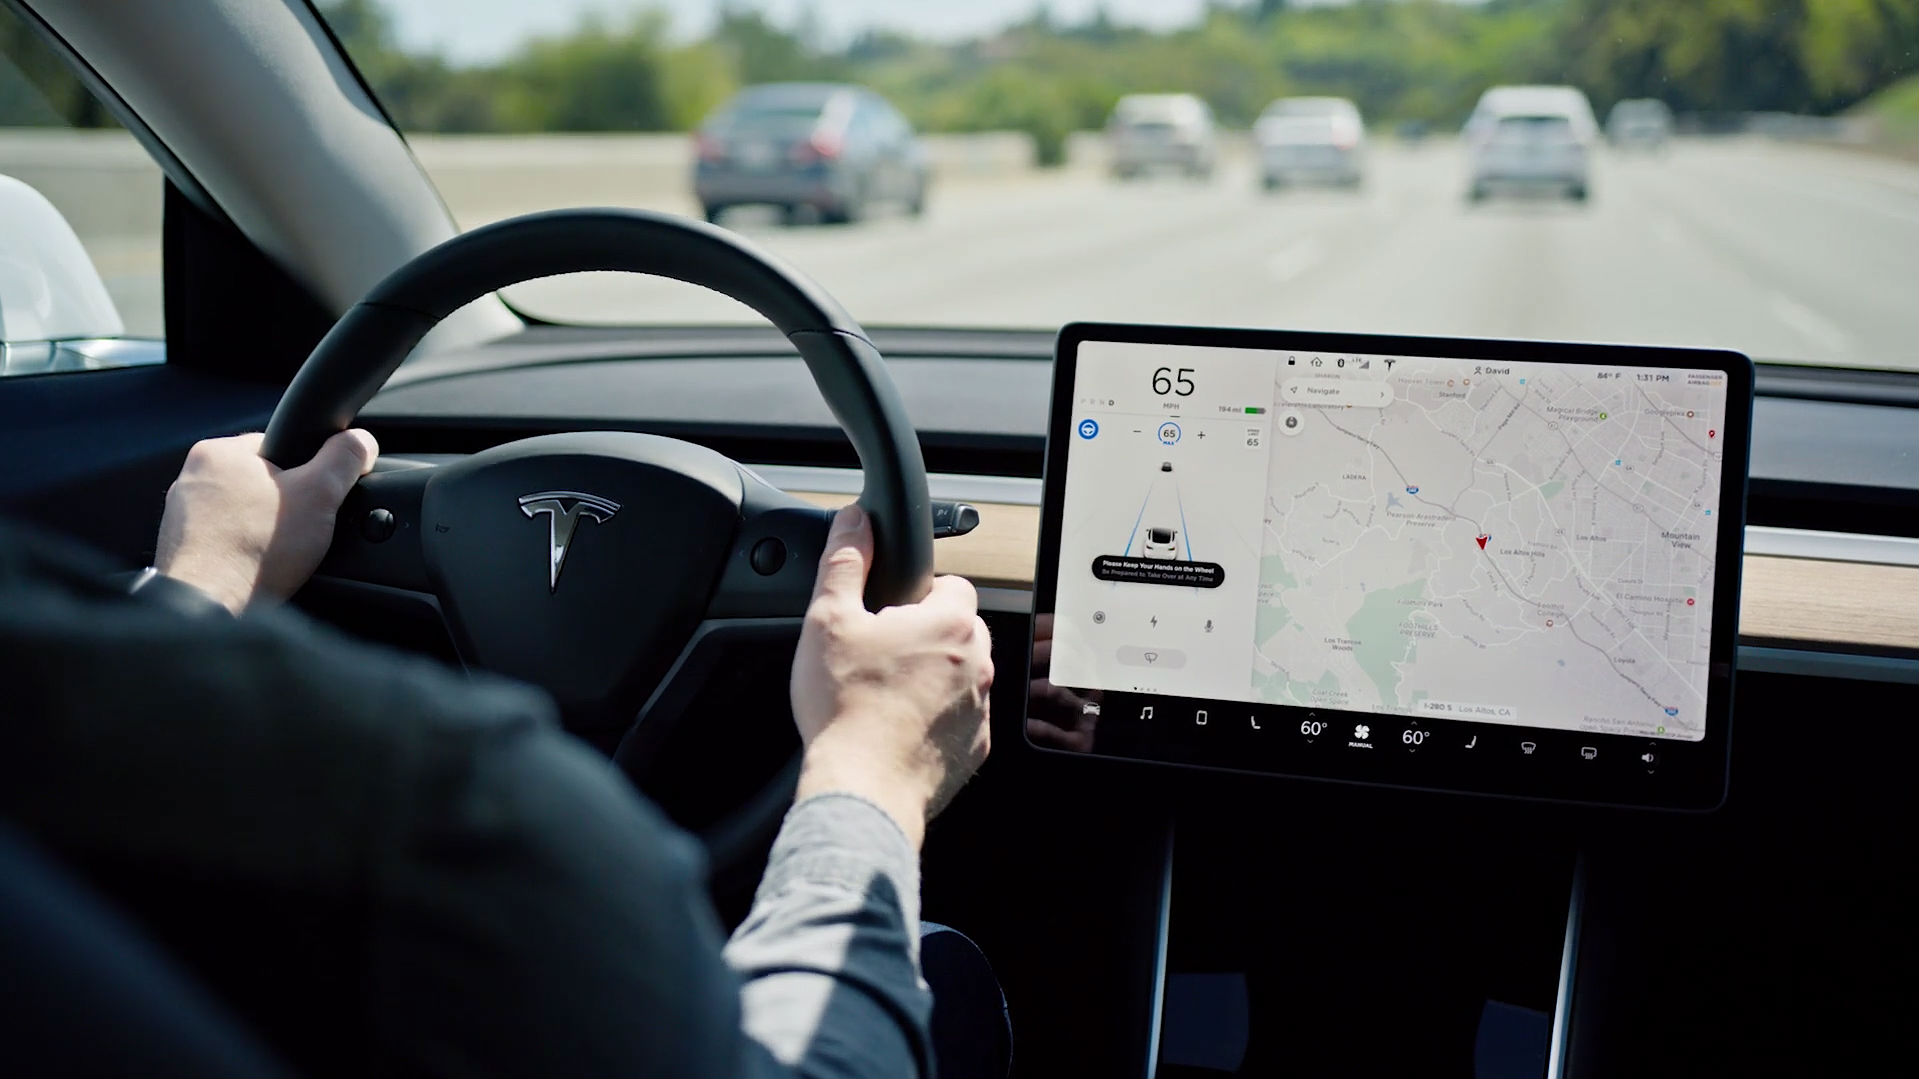 Tesla seat sensors could be used to improve smartphone Bluetooth handoff